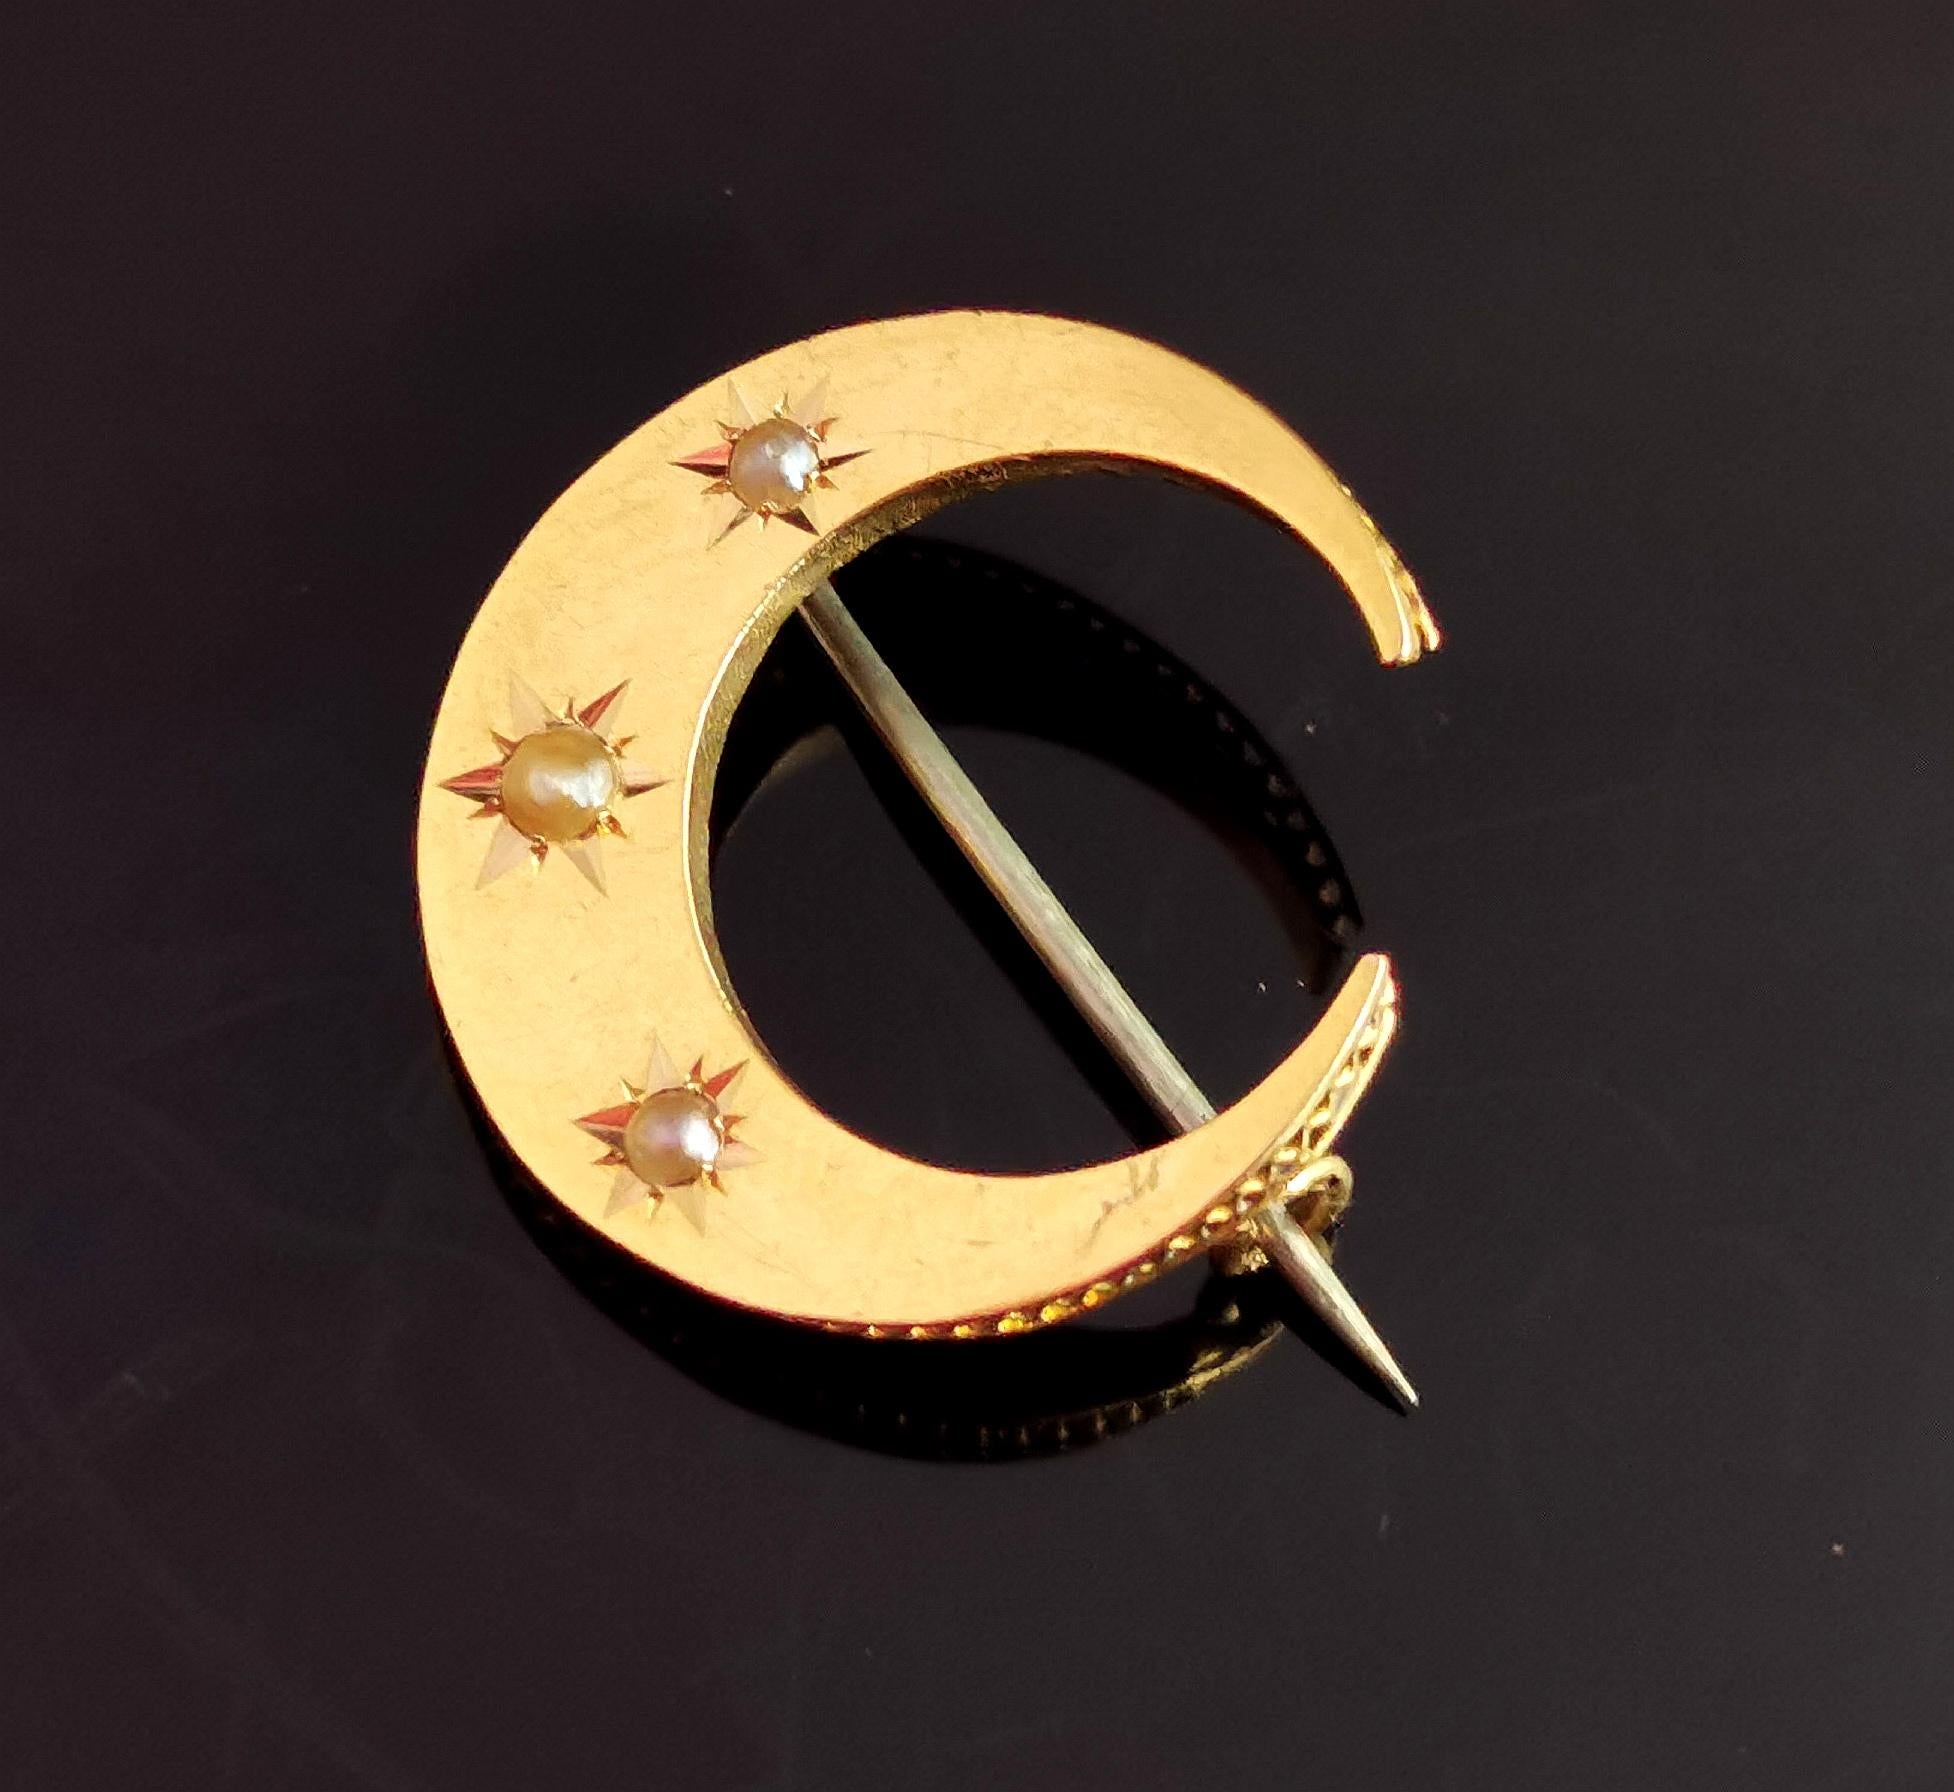 Antique Victorian Crescent Moon Brooch, 15k Gold and Split Pearl 2